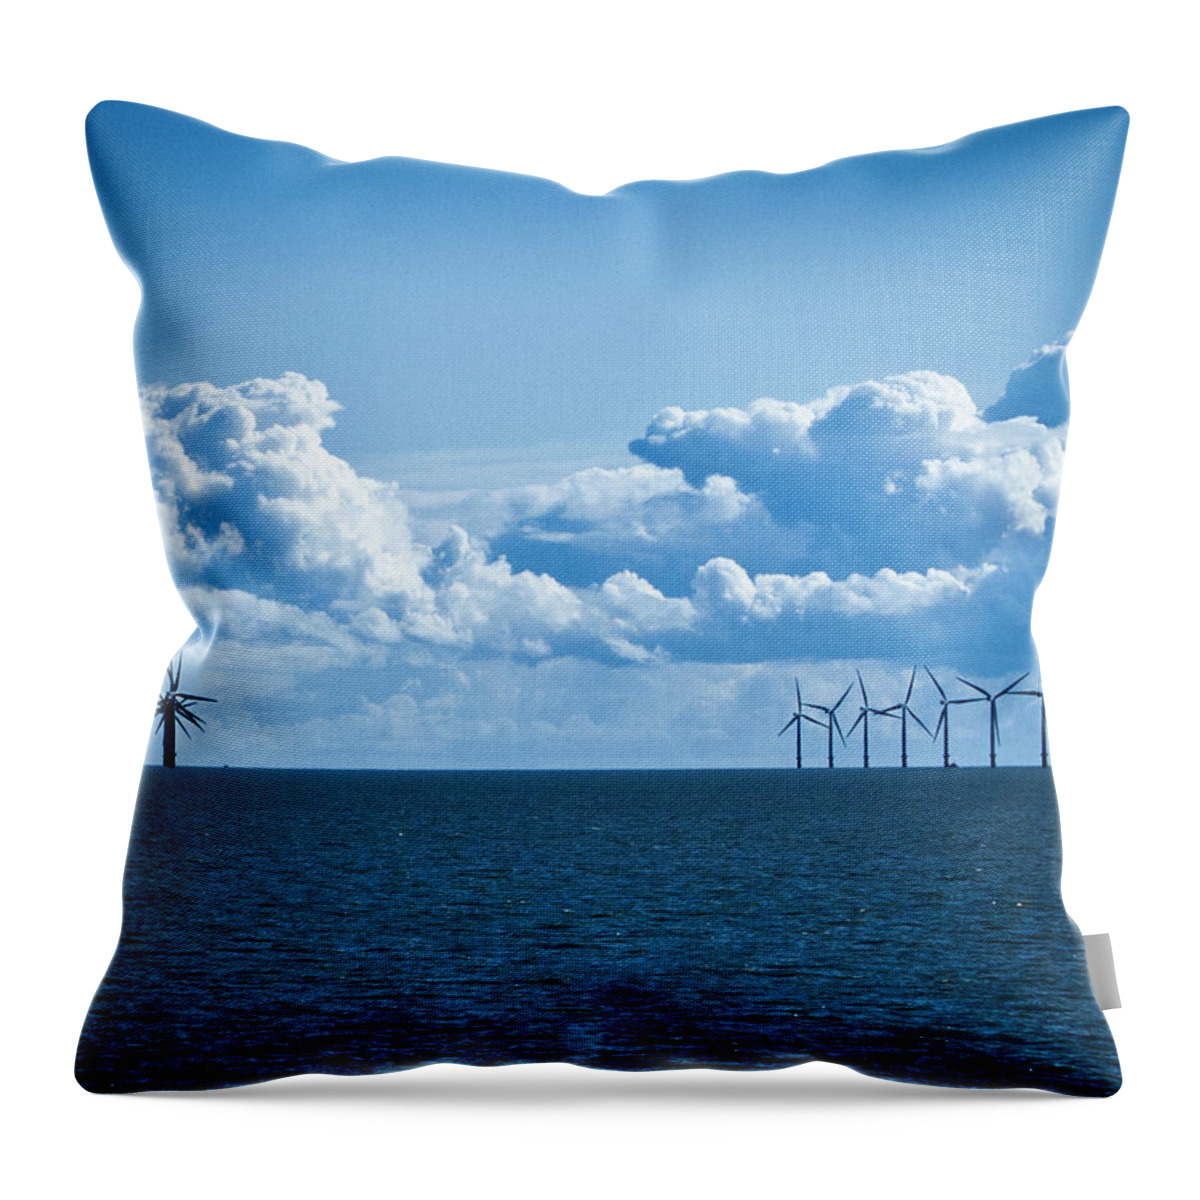 Tranquility Throw Pillow featuring the photograph Turbine Wind Farm Out At Sea by Nick Page